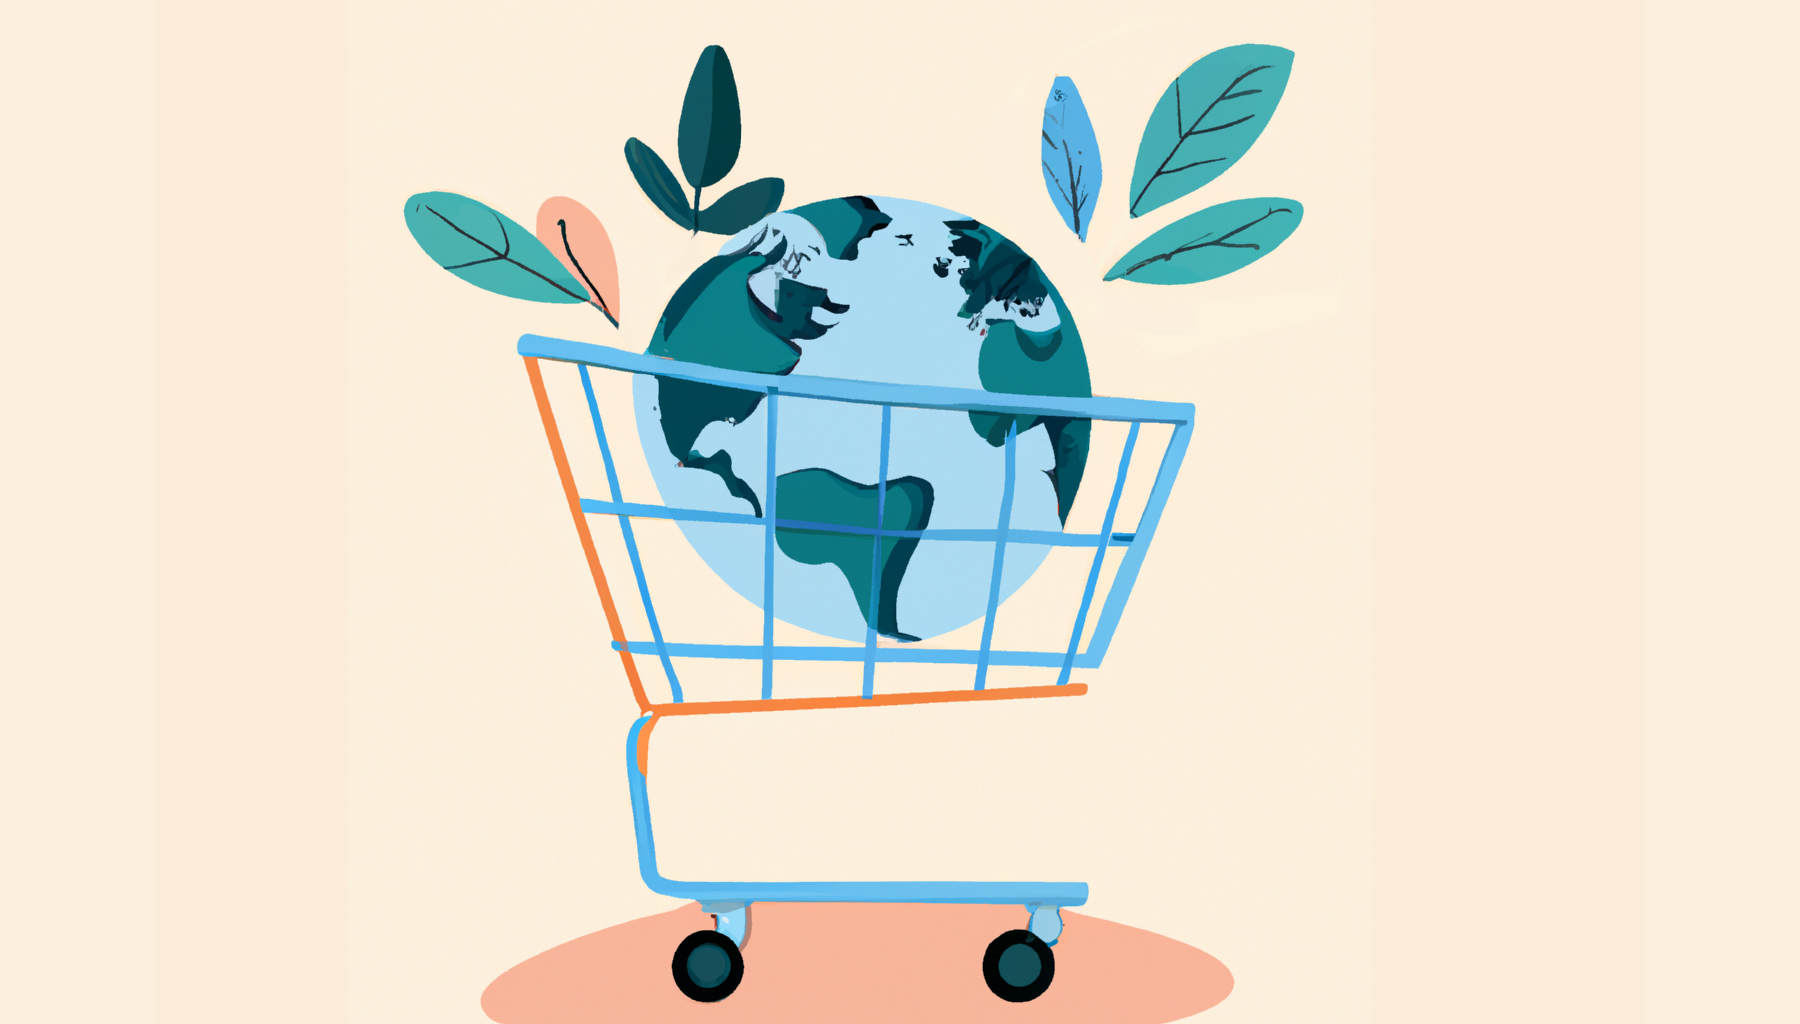 Illustration of the Earth in a shoppin cart